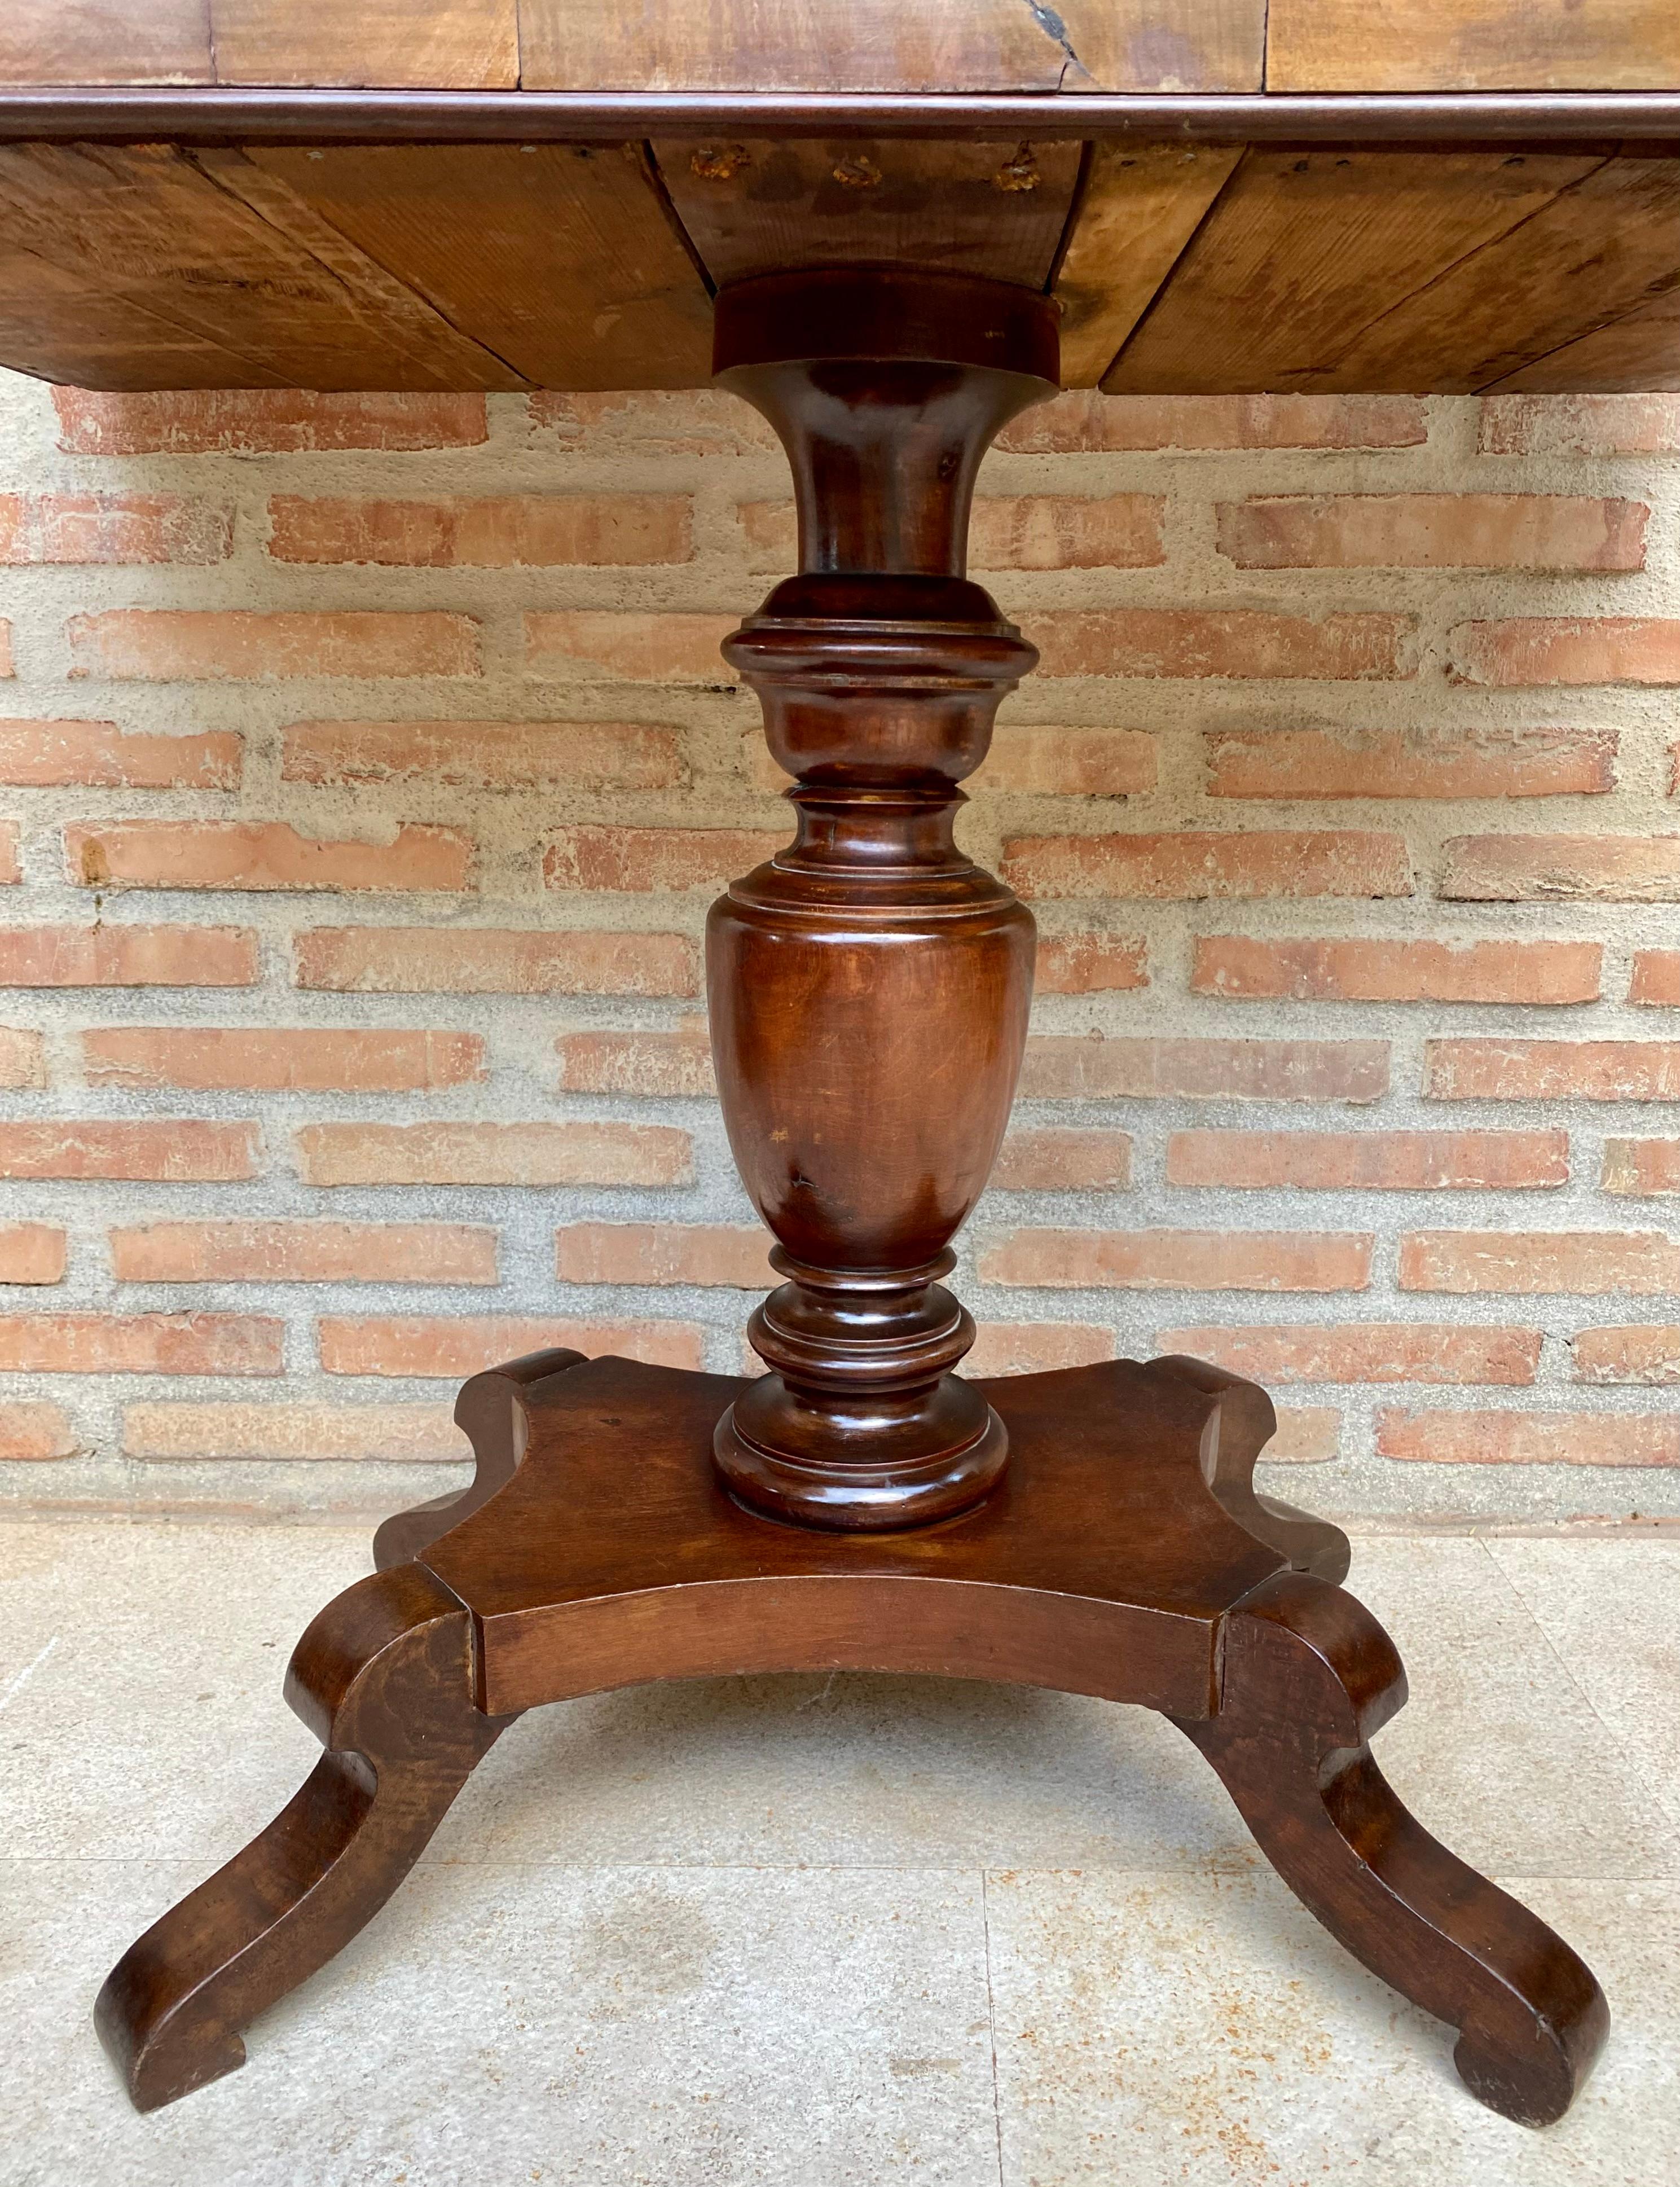 French Walnut Fold-Over Game Table, circa 1920.
Versatile and functional, this walnut game table features a hinged top that easily lifts on one side and pivots to open or folds to close. The table offers storage for your favorite games in the